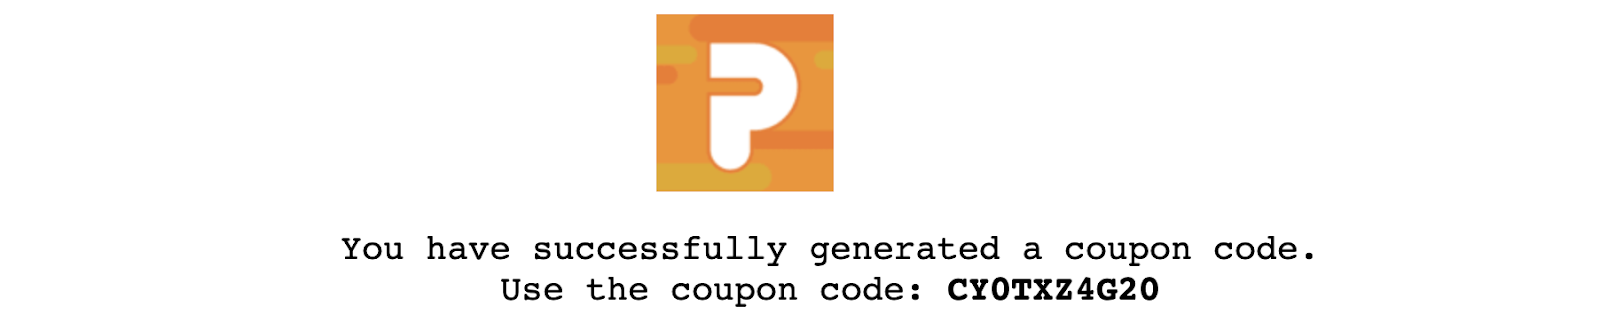 Example confirmation message after a user successfully generates a coupon code.